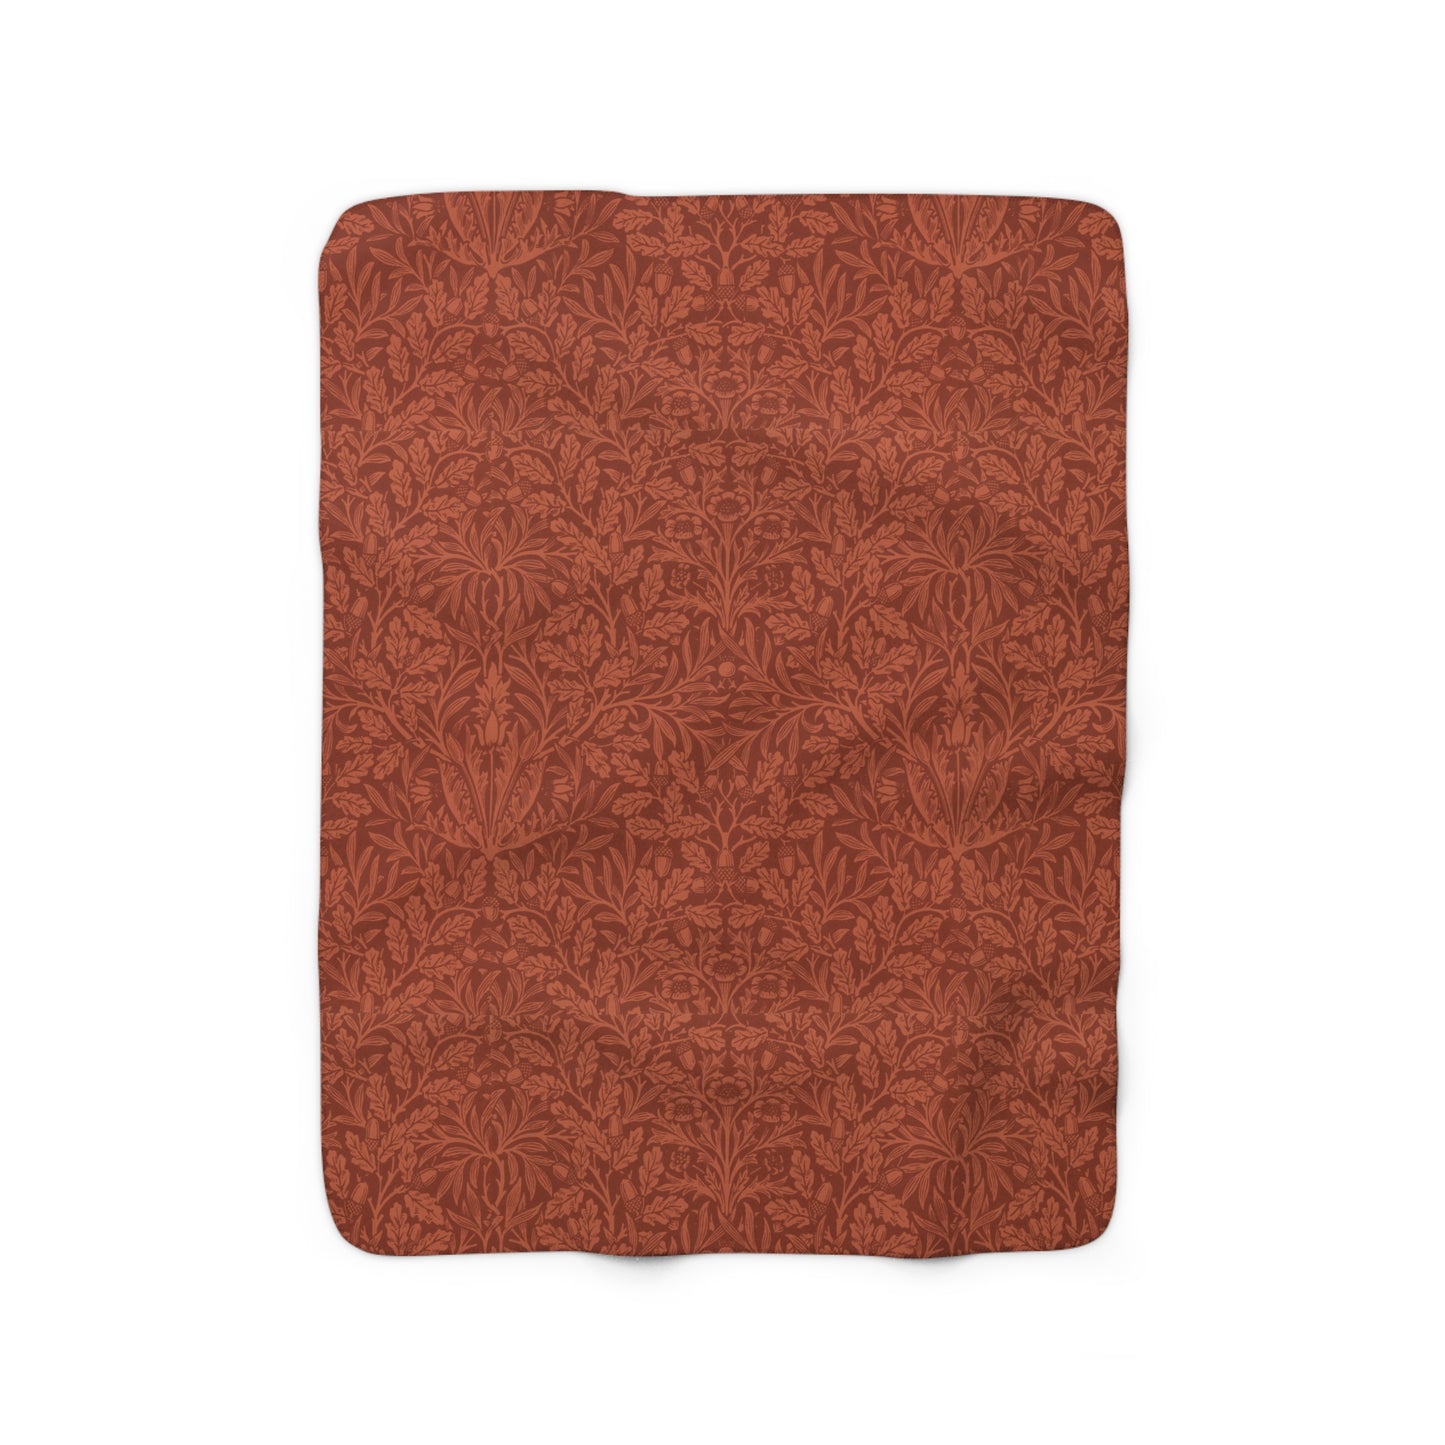 william-morris-co-sherpa-fleece-blanket-acorn-and-oak-leaves-collection-rust-5